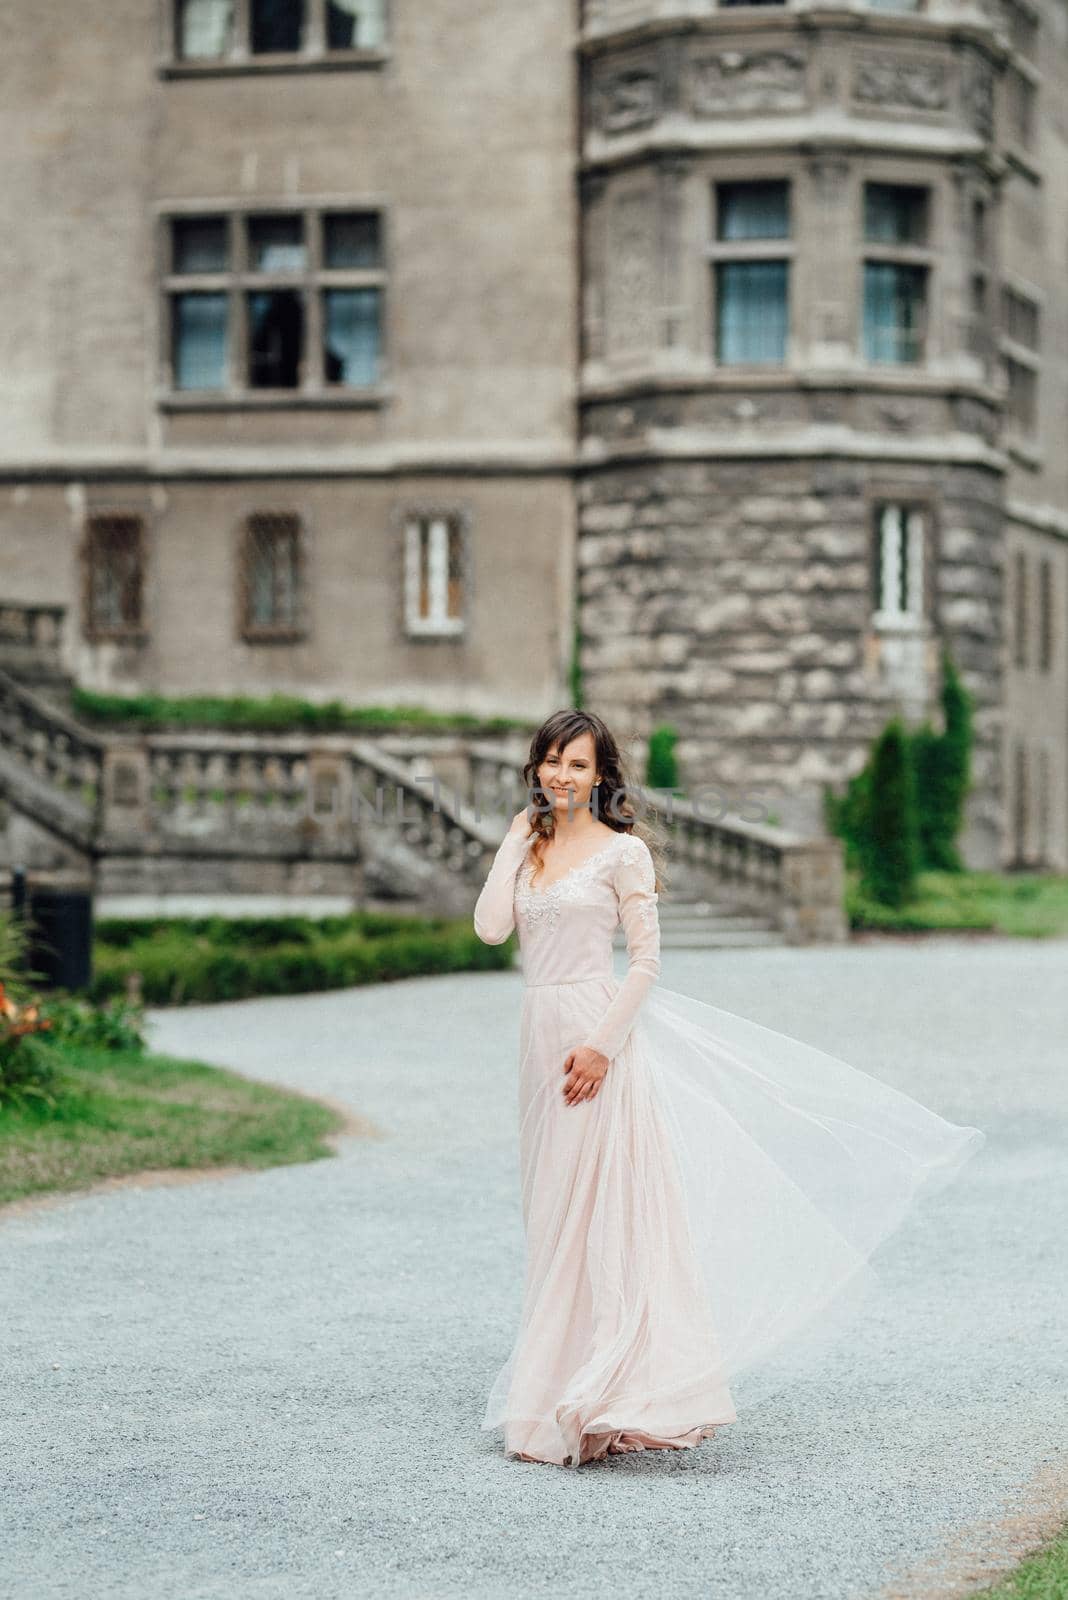 A girl in a light pink dress against the background of a medieva castle by Andreua